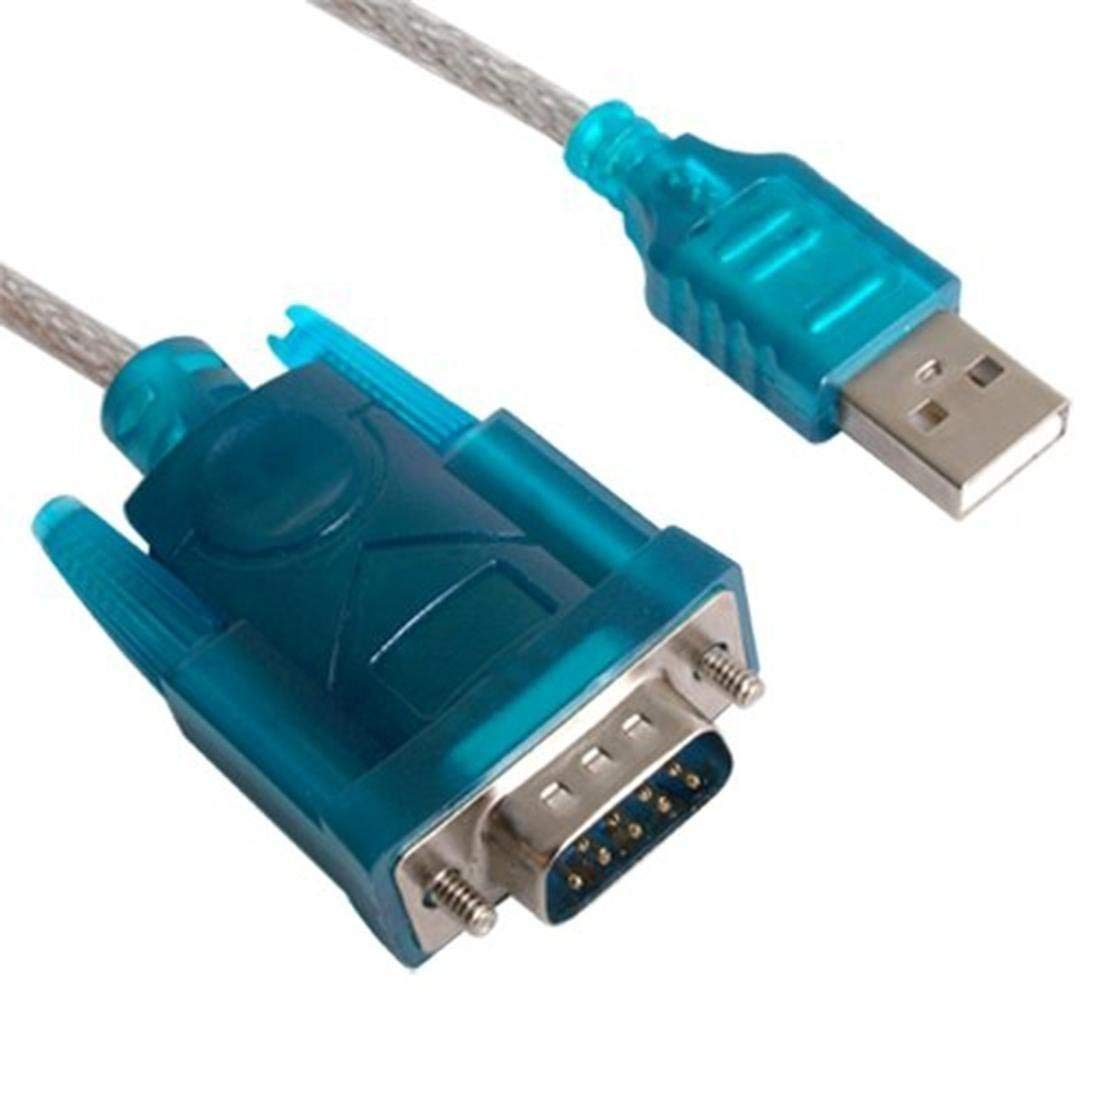 USB TO RS-232 SERIAL CABLE ADAPTER (SILVER)